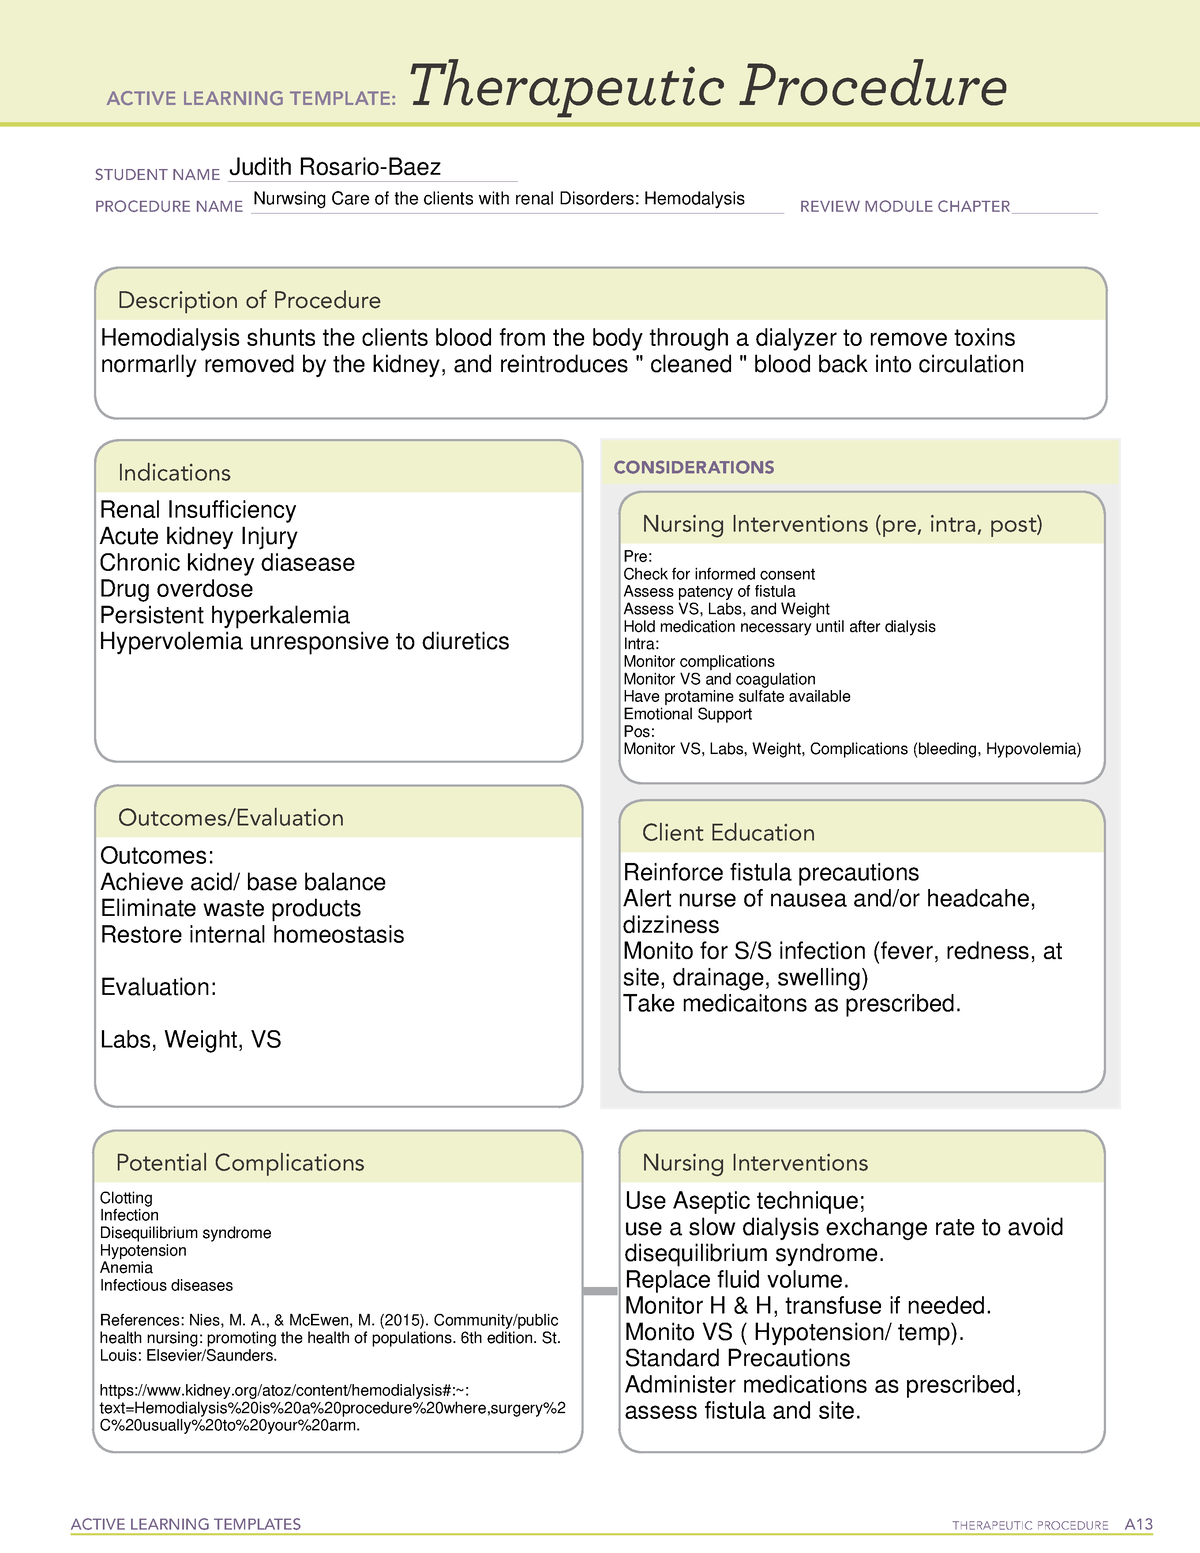 Active Learning Template Therapeutic Procedure form - ACTIVE LEARNING ...